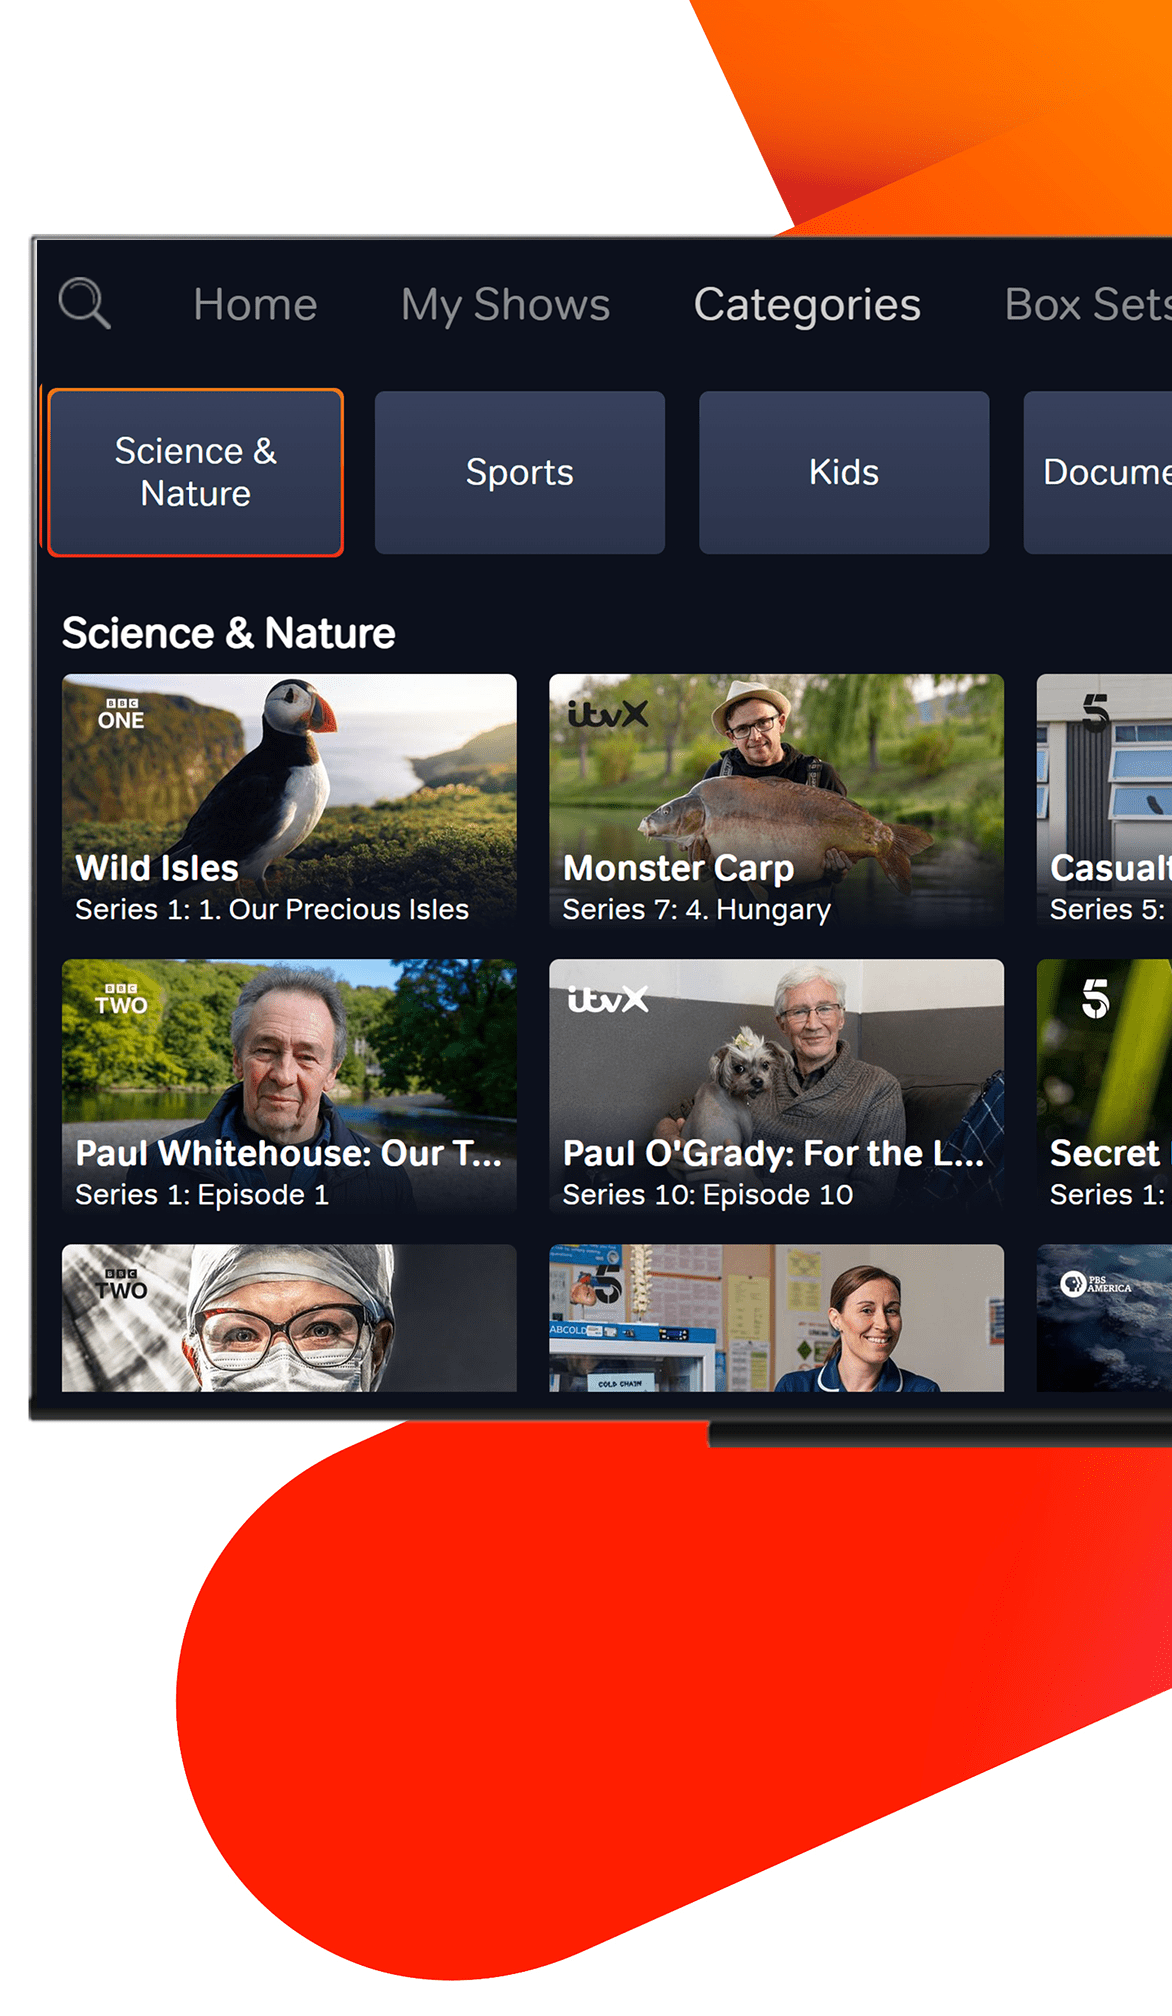 Explore freeview play - science